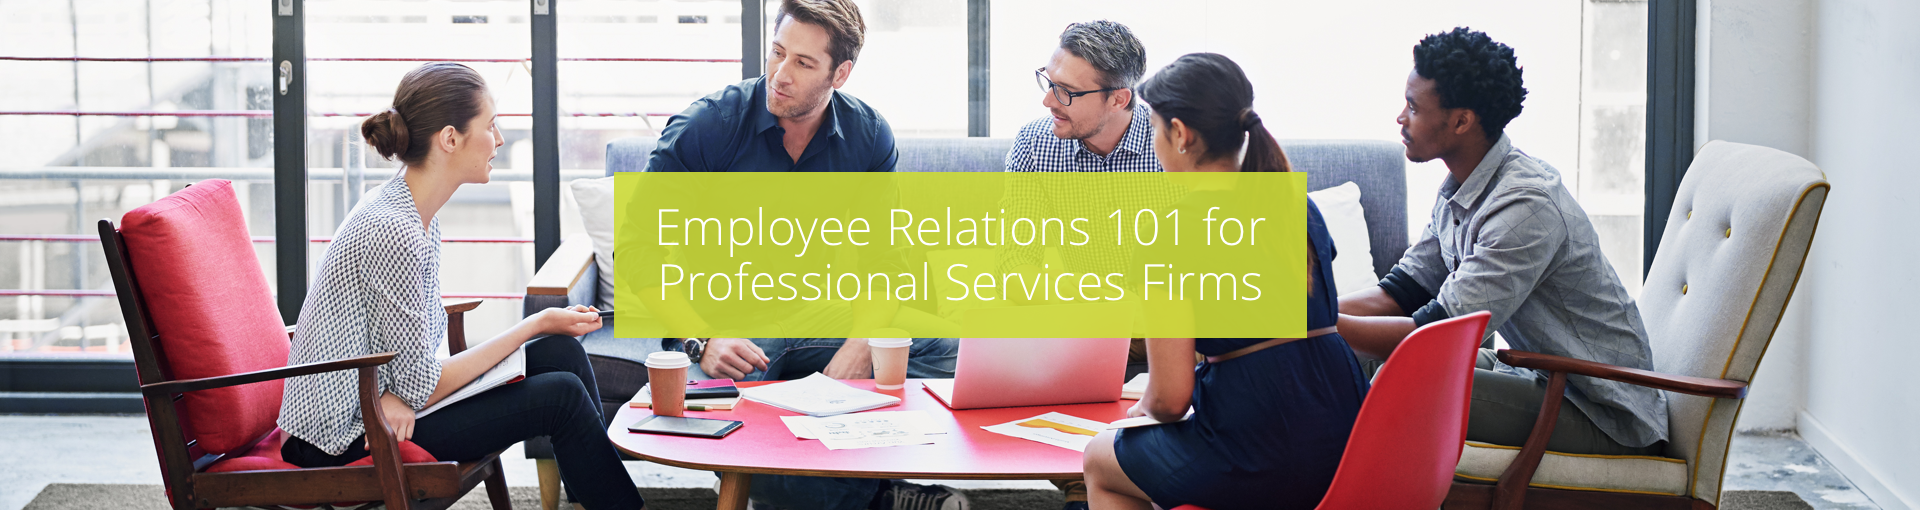 Employee Relations 101 for Professional Services Firms Featured Image